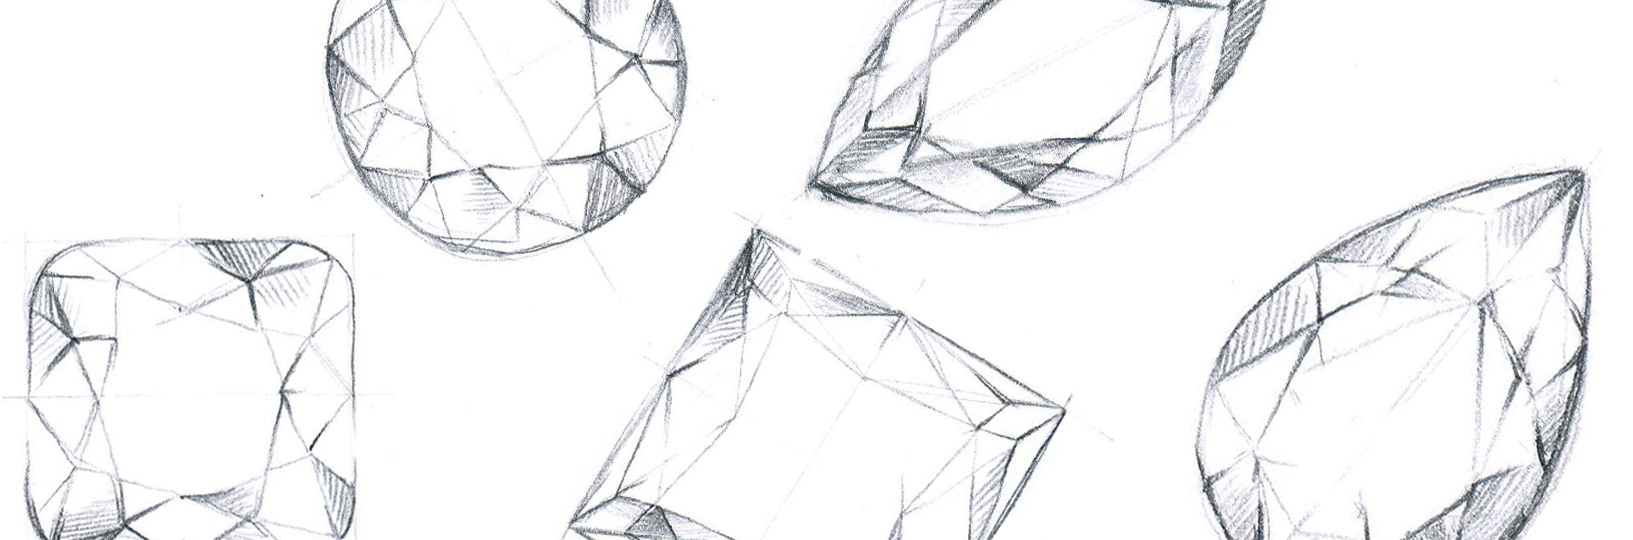 A sketch of different diamond shapes